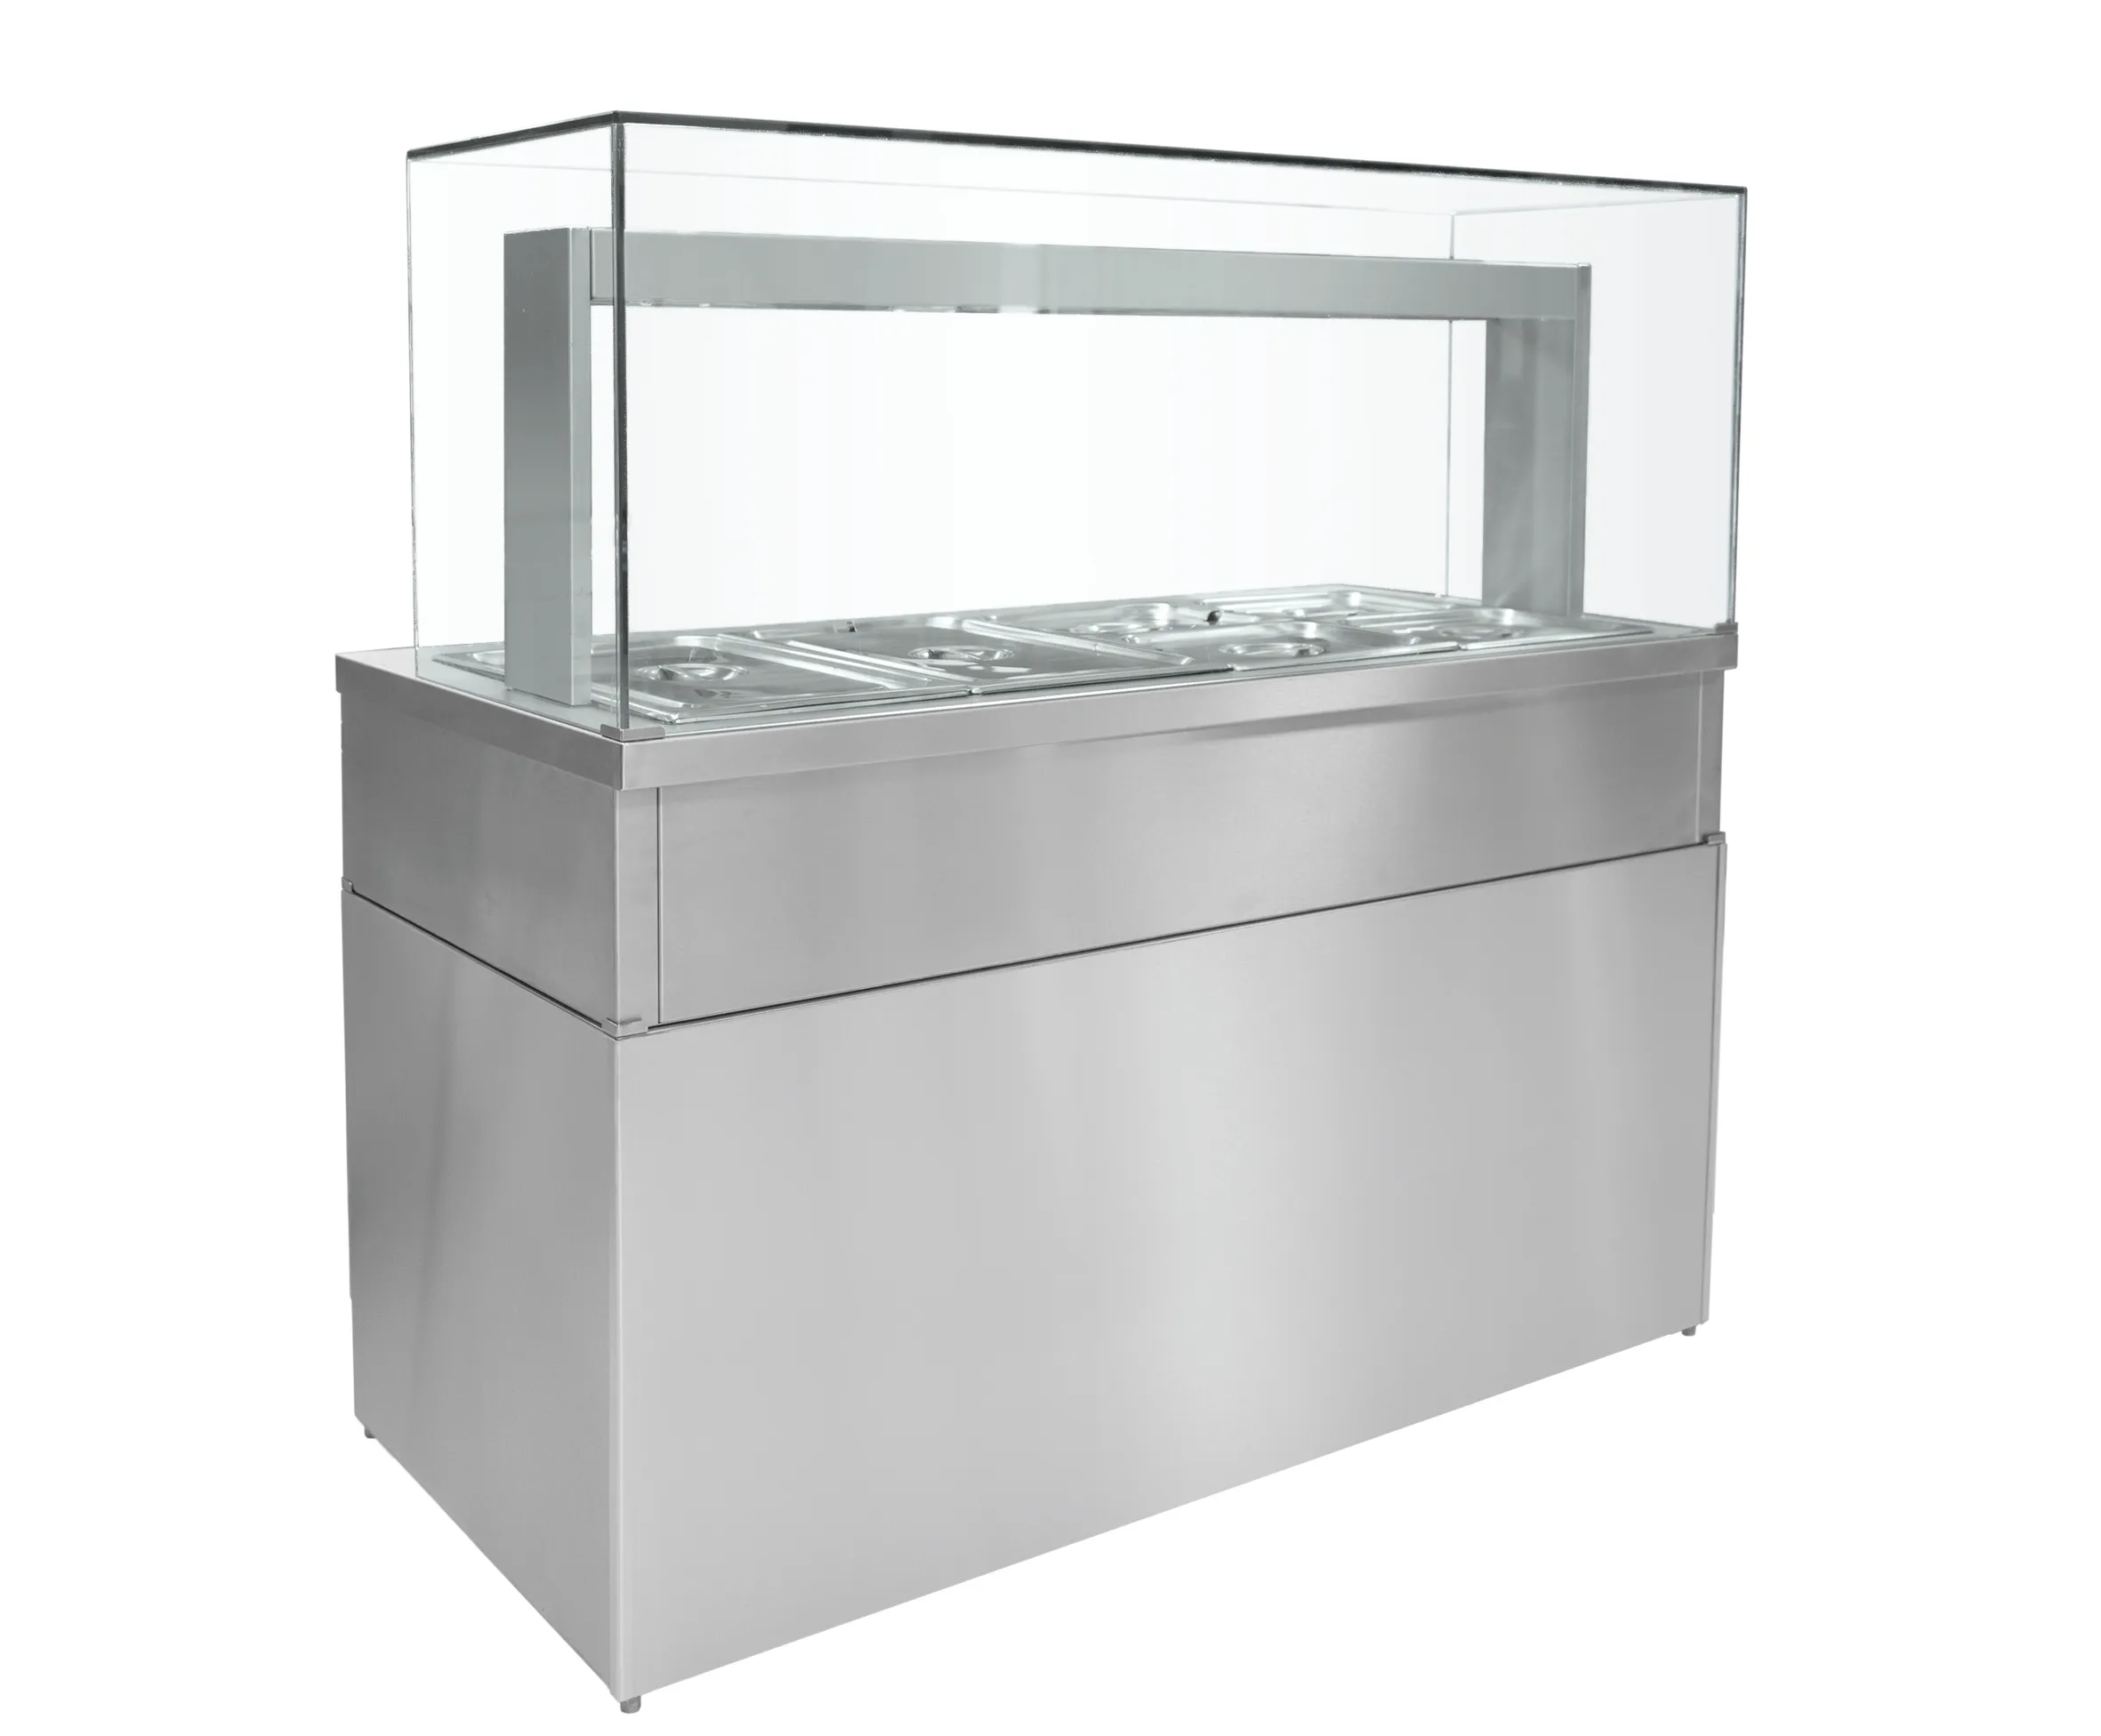 Parry HGBM5 - Heated Bain Marie Servery With Glass